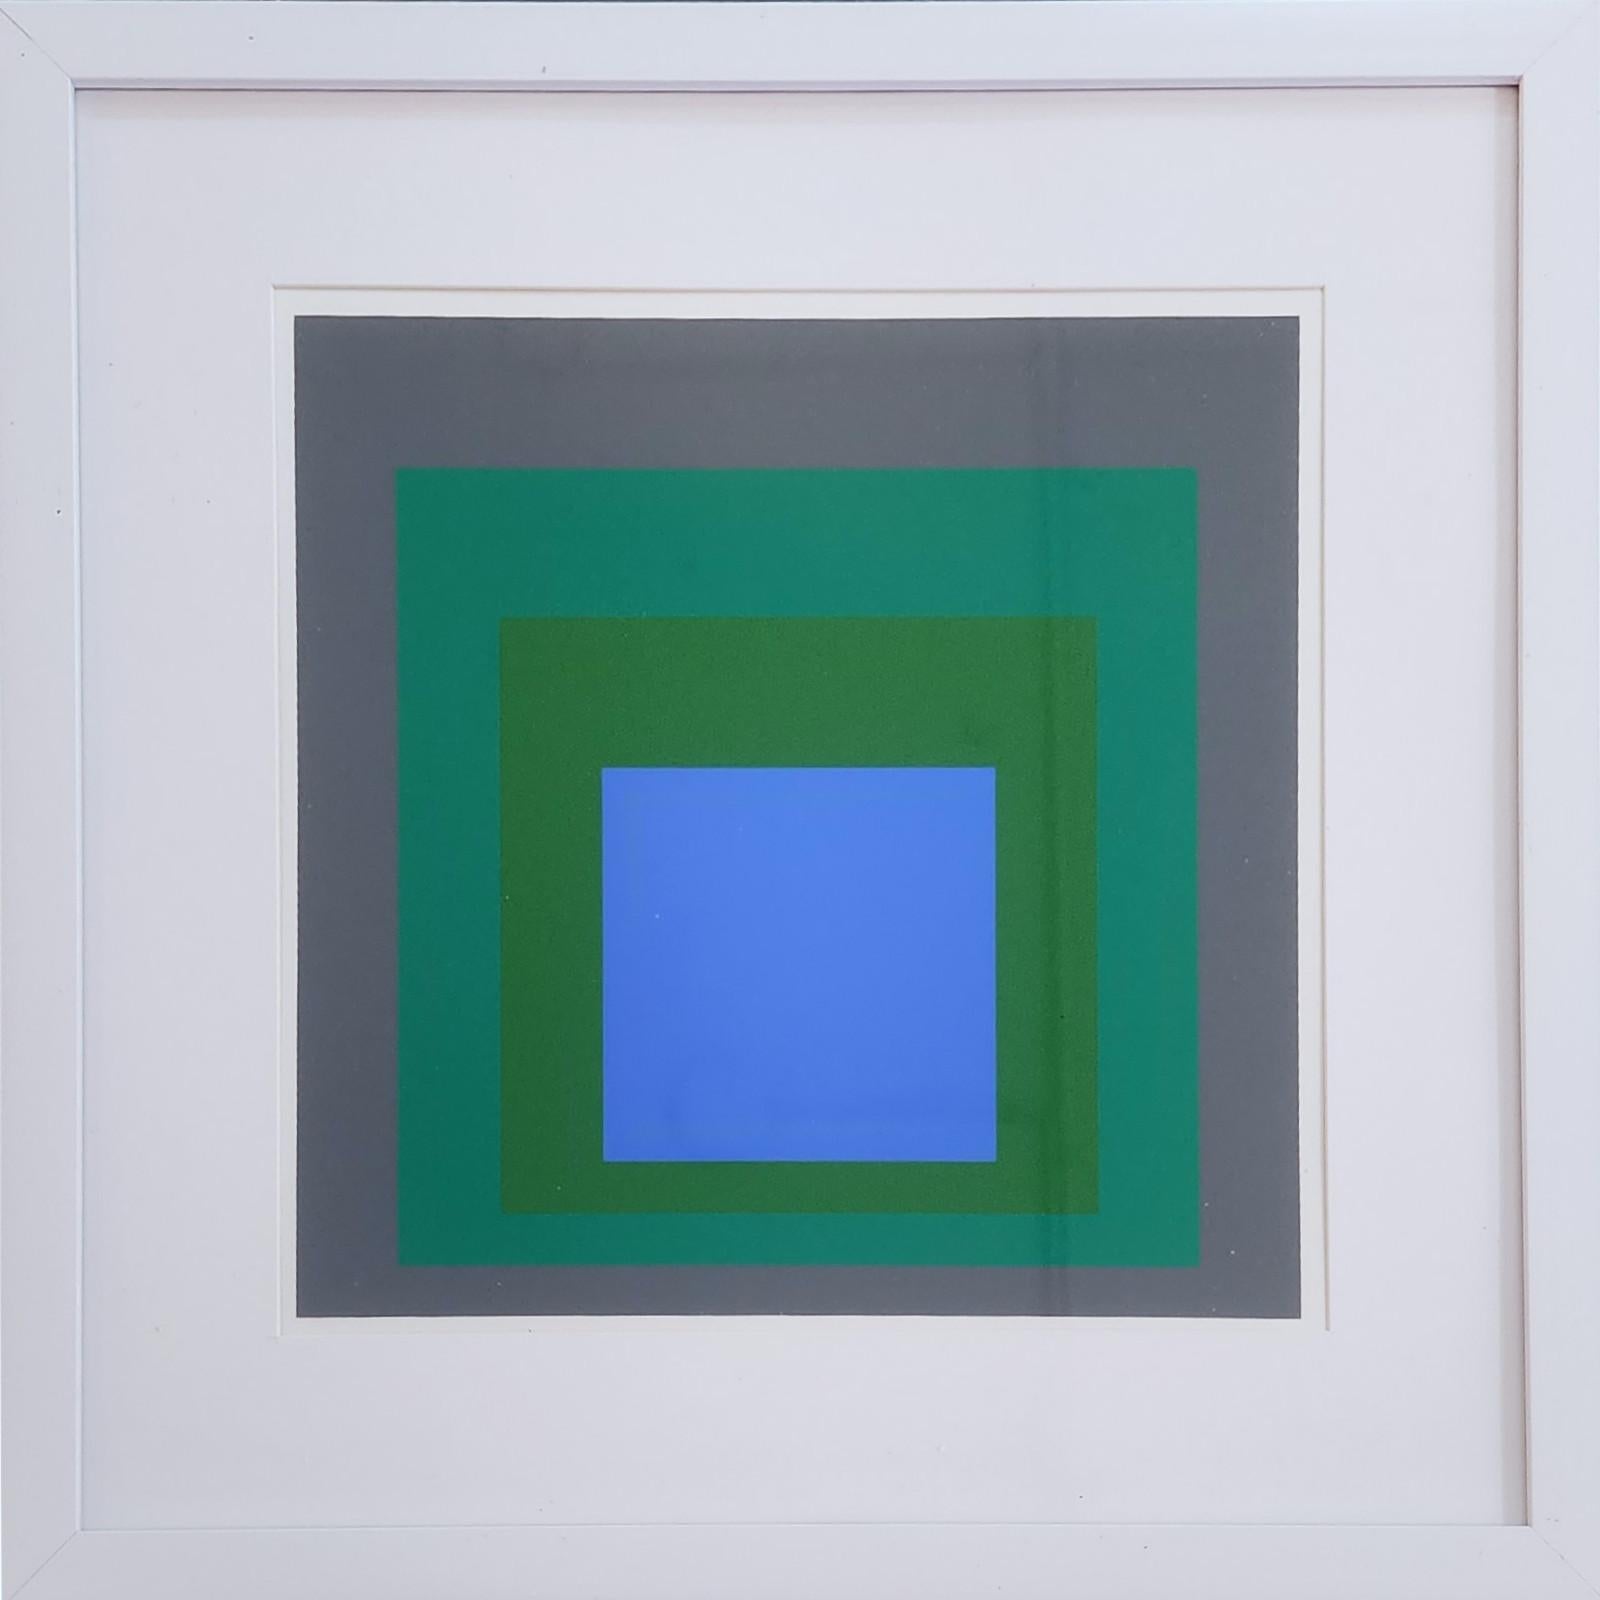 Homage to the Square: Blue Look (Bauhaus, Minimalism, 50% OFF LIST PRICE) - Print by (after) Josef Albers